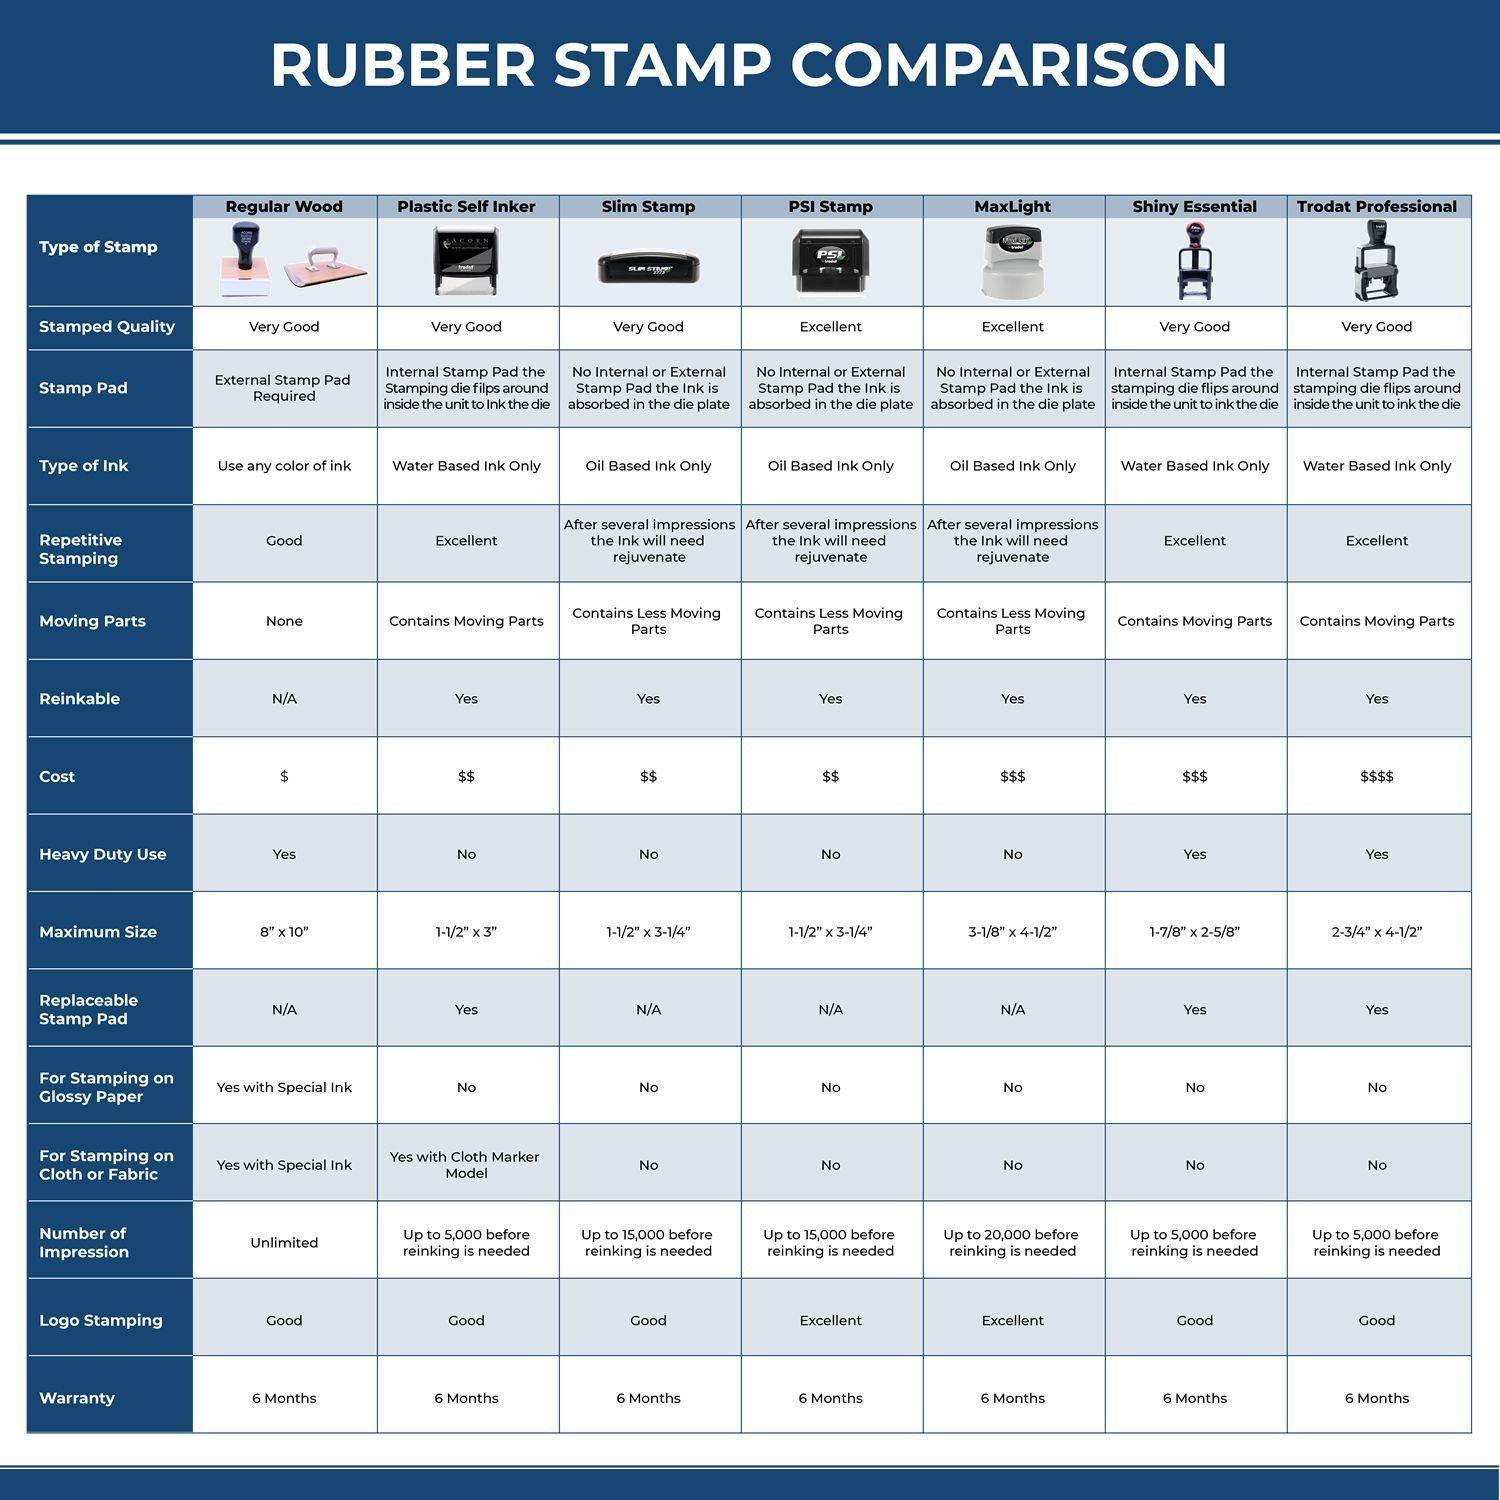 Large Narrow For Deposit Only Rubber Stamp 4973R Rubber Stamp Comparison